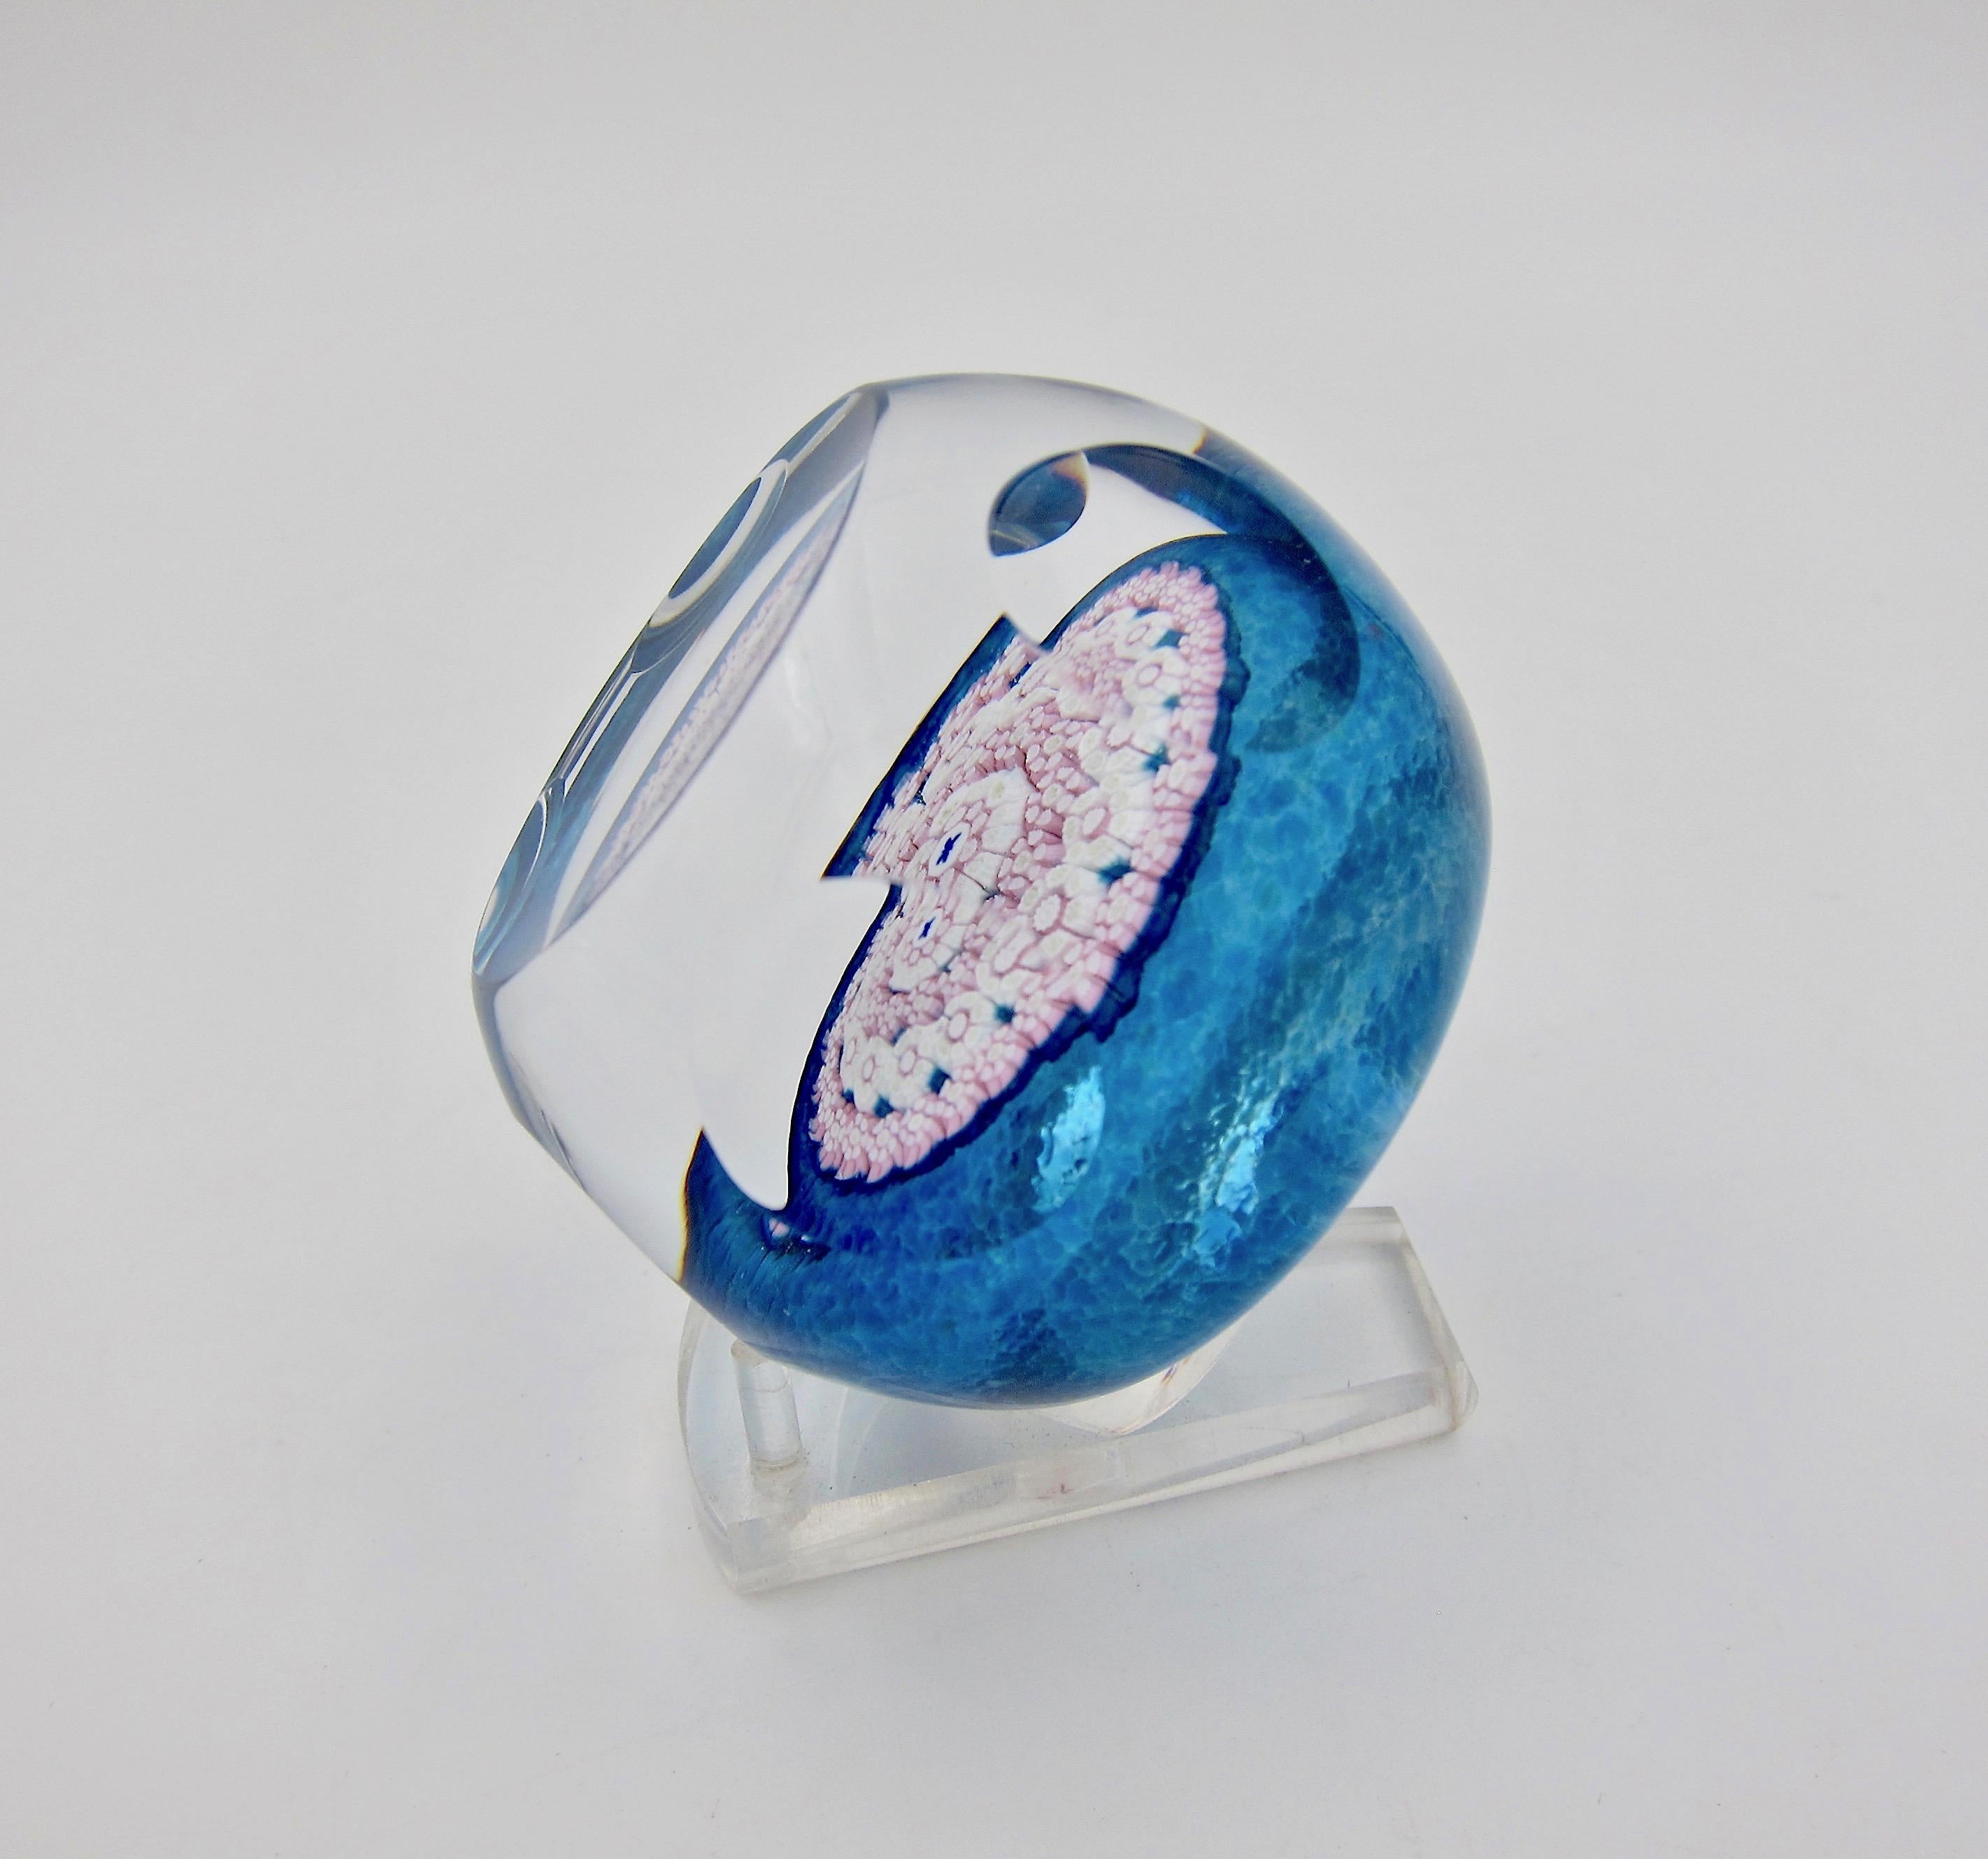 British English Whitefriars Millefiori Art Glass Paperweight with Butterfly, 1983